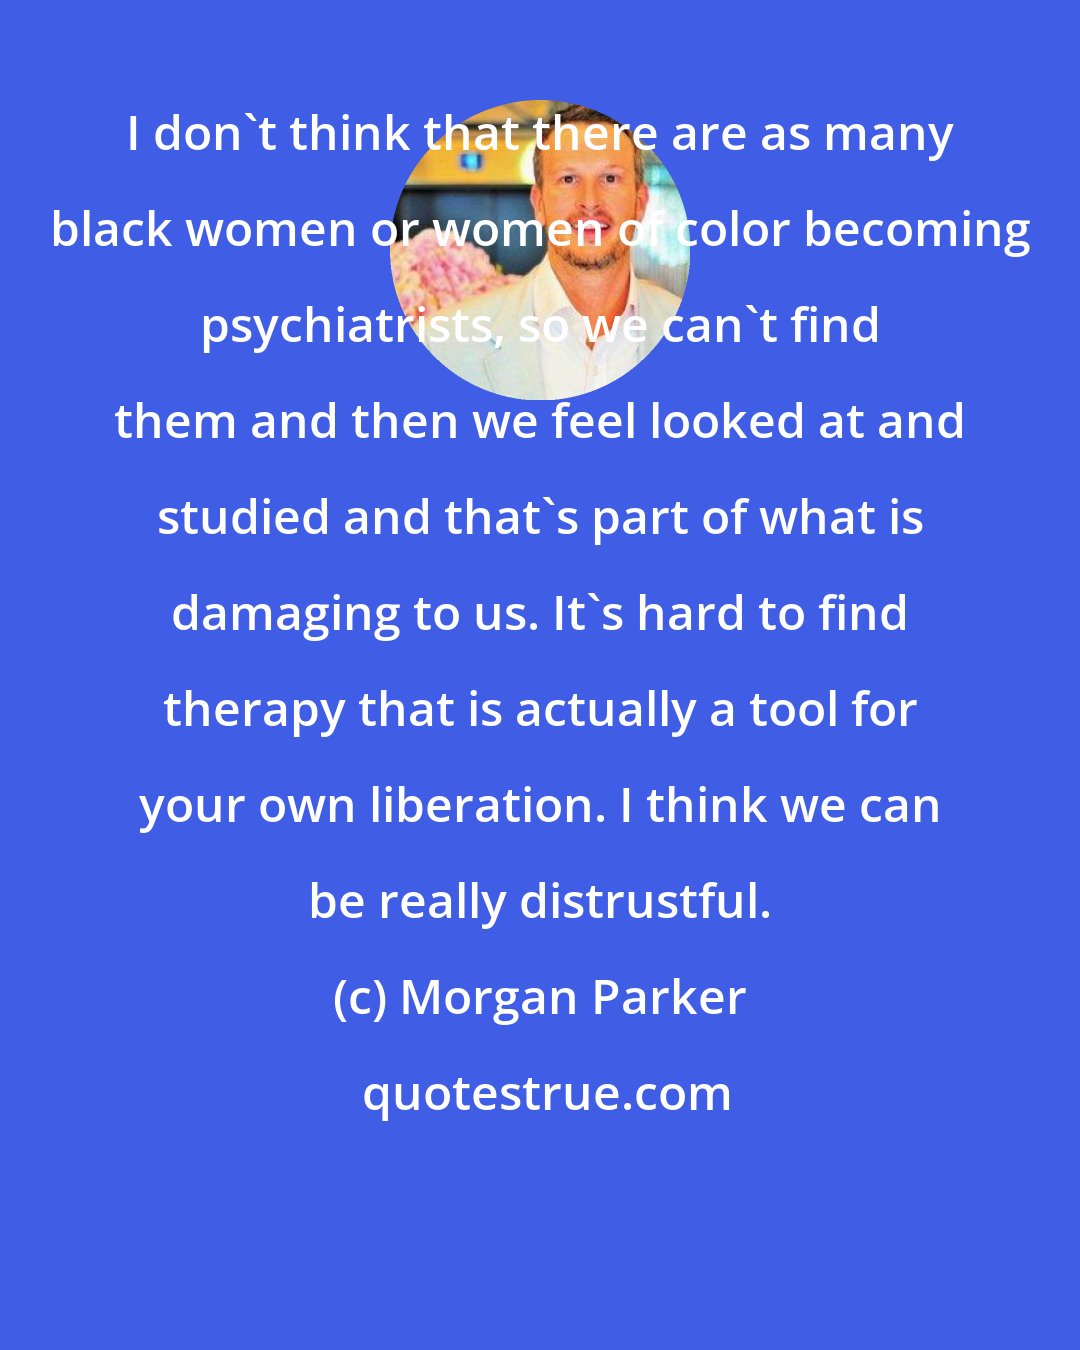 Morgan Parker: I don't think that there are as many black women or women of color becoming psychiatrists, so we can't find them and then we feel looked at and studied and that's part of what is damaging to us. It's hard to find therapy that is actually a tool for your own liberation. I think we can be really distrustful.